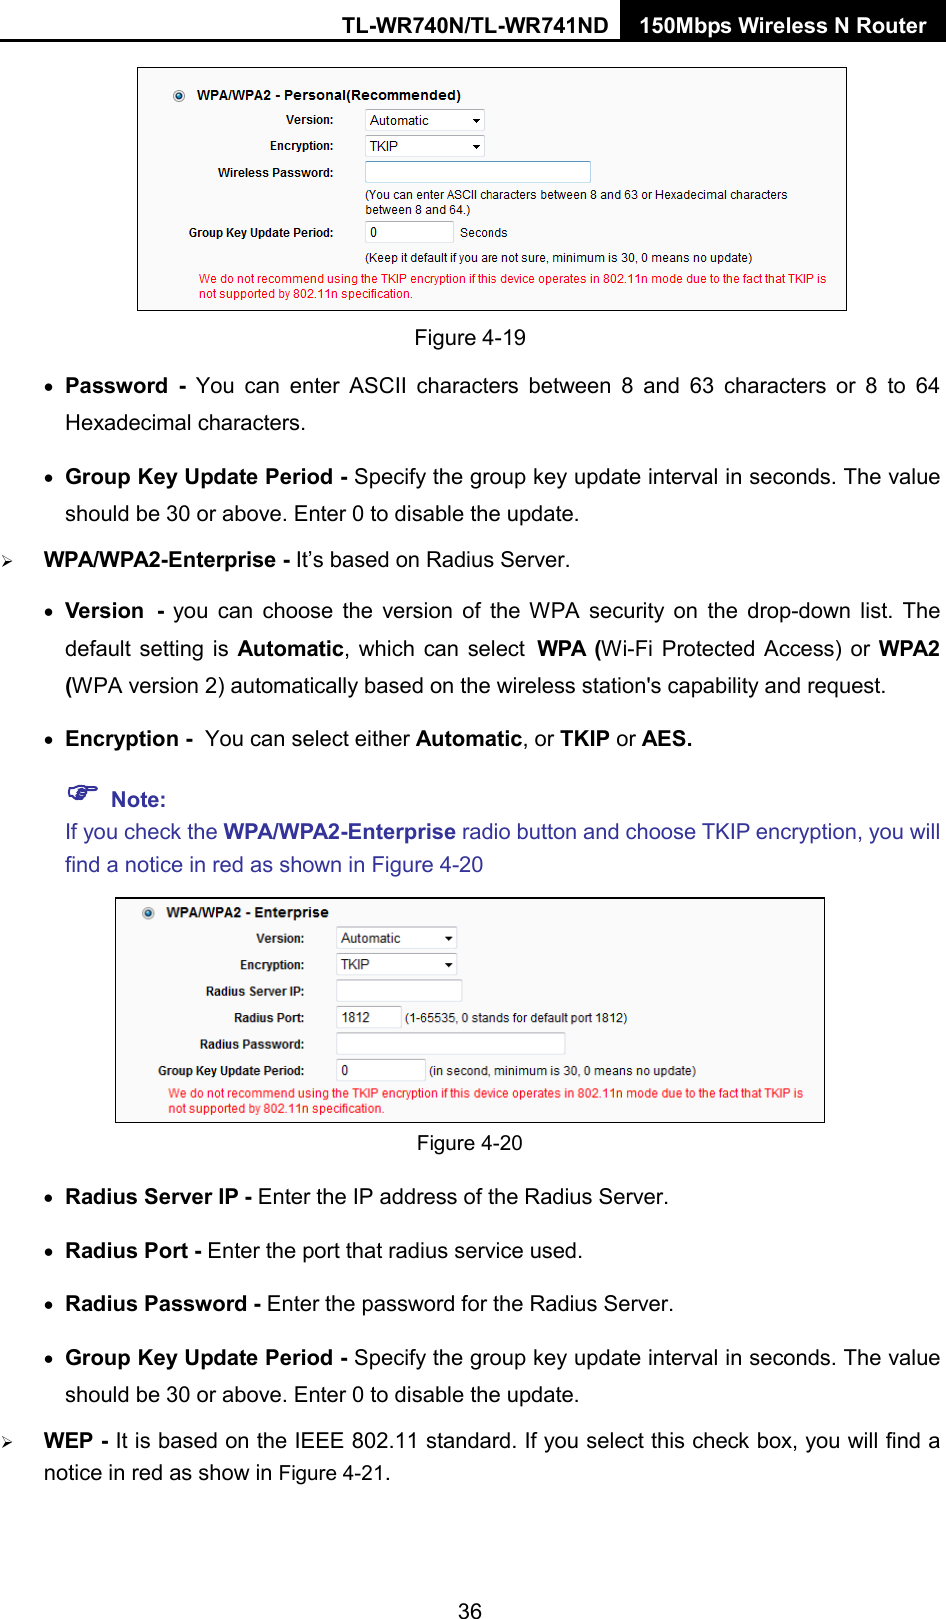 TL-WR740N/TL-WR741ND 150Mbps Wireless N Router   Figure 4-19 • Password - You can enter ASCII characters between 8 and 63 characters or 8 to 64 Hexadecimal characters. • Group Key Update Period - Specify the group key update interval in seconds. The value should be 30 or above. Enter 0 to disable the update.  WPA/WPA2-Enterprise - It’s based on Radius Server. • Version - you can choose the version of the WPA security on the drop-down list. The default setting is Automatic, which can select WPA  (Wi-Fi Protected Access) or WPA2 (WPA version 2) automatically based on the wireless station&apos;s capability and request. • Encryption - You can select either Automatic, or TKIP or AES.  Note:   If you check the WPA/WPA2-Enterprise radio button and choose TKIP encryption, you will find a notice in red as shown in Figure 4-20  Figure 4-20 • Radius Server IP - Enter the IP address of the Radius Server. • Radius Port - Enter the port that radius service used. • Radius Password - Enter the password for the Radius Server. • Group Key Update Period - Specify the group key update interval in seconds. The value should be 30 or above. Enter 0 to disable the update.  WEP - It is based on the IEEE 802.11 standard. If you select this check box, you will find a notice in red as show in Figure 4-21.   36 